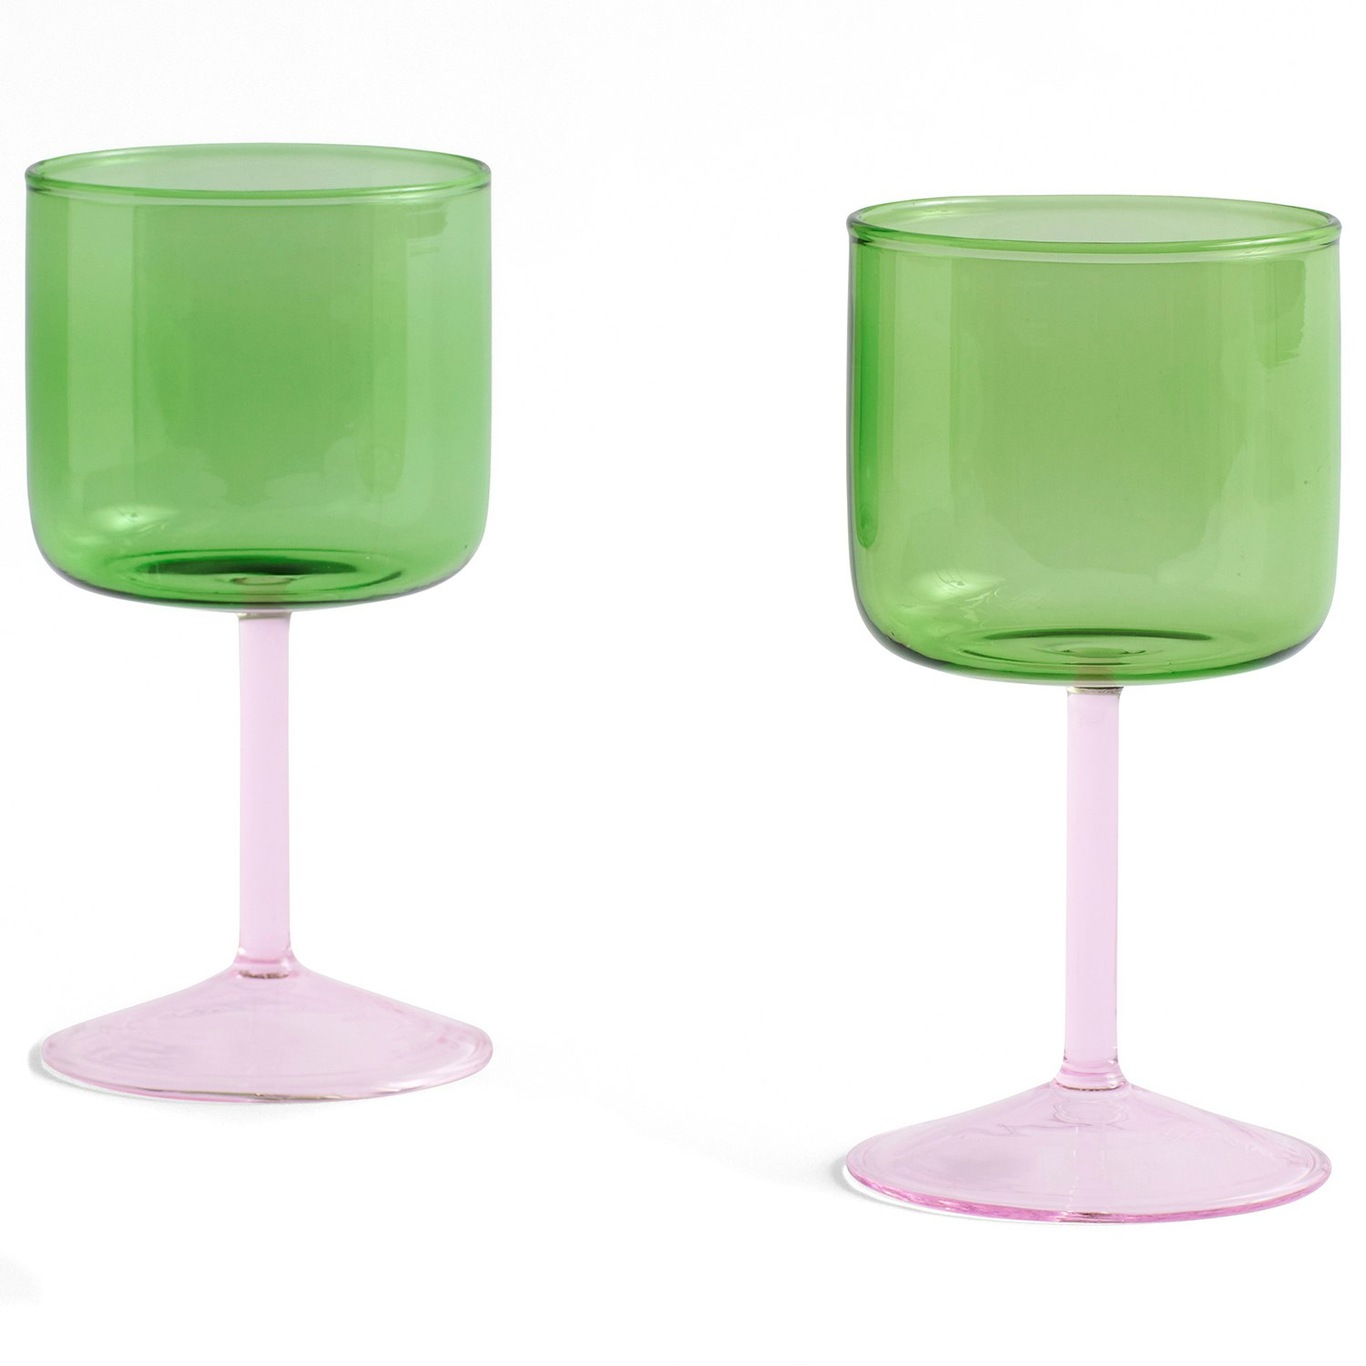 Tint Wine Glass 2-pack, Green/Pink